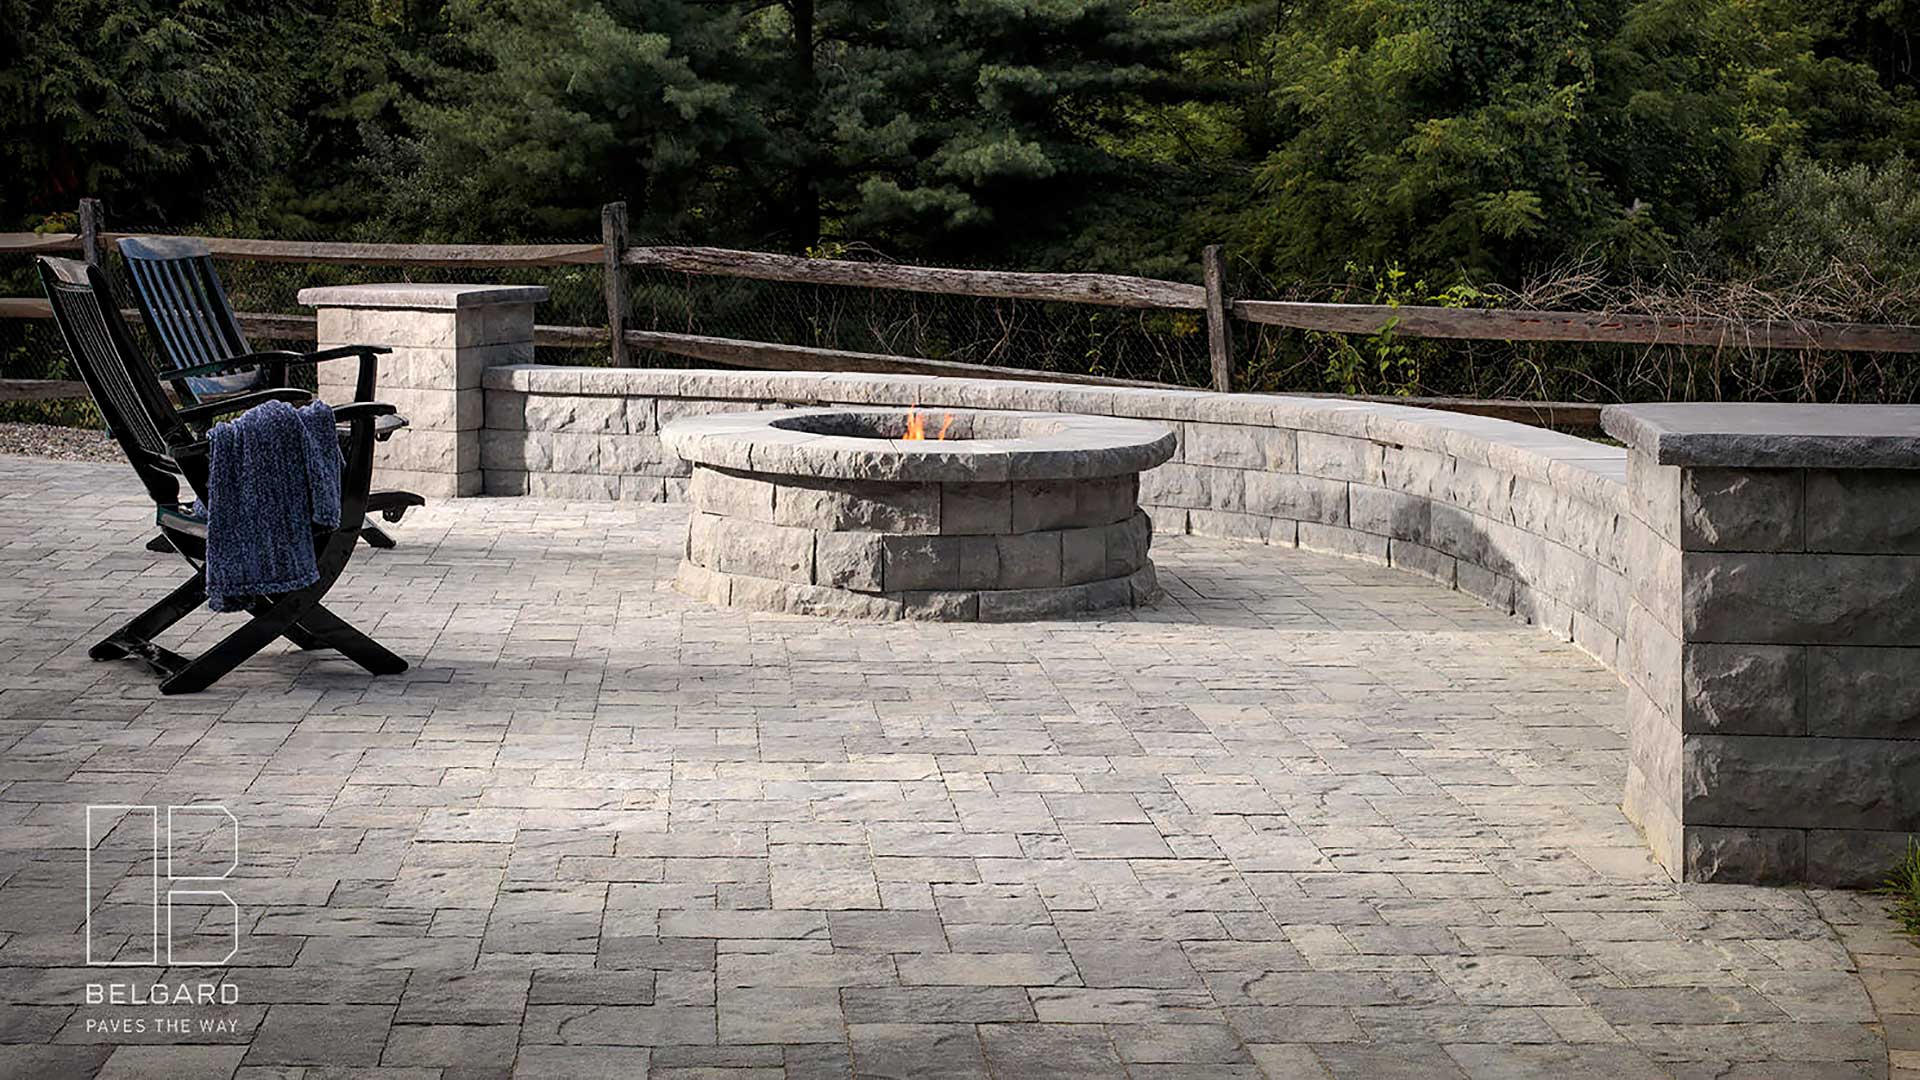 Belgard paver patio and fire pit with seating walls and chairs in Clinton, NJ.